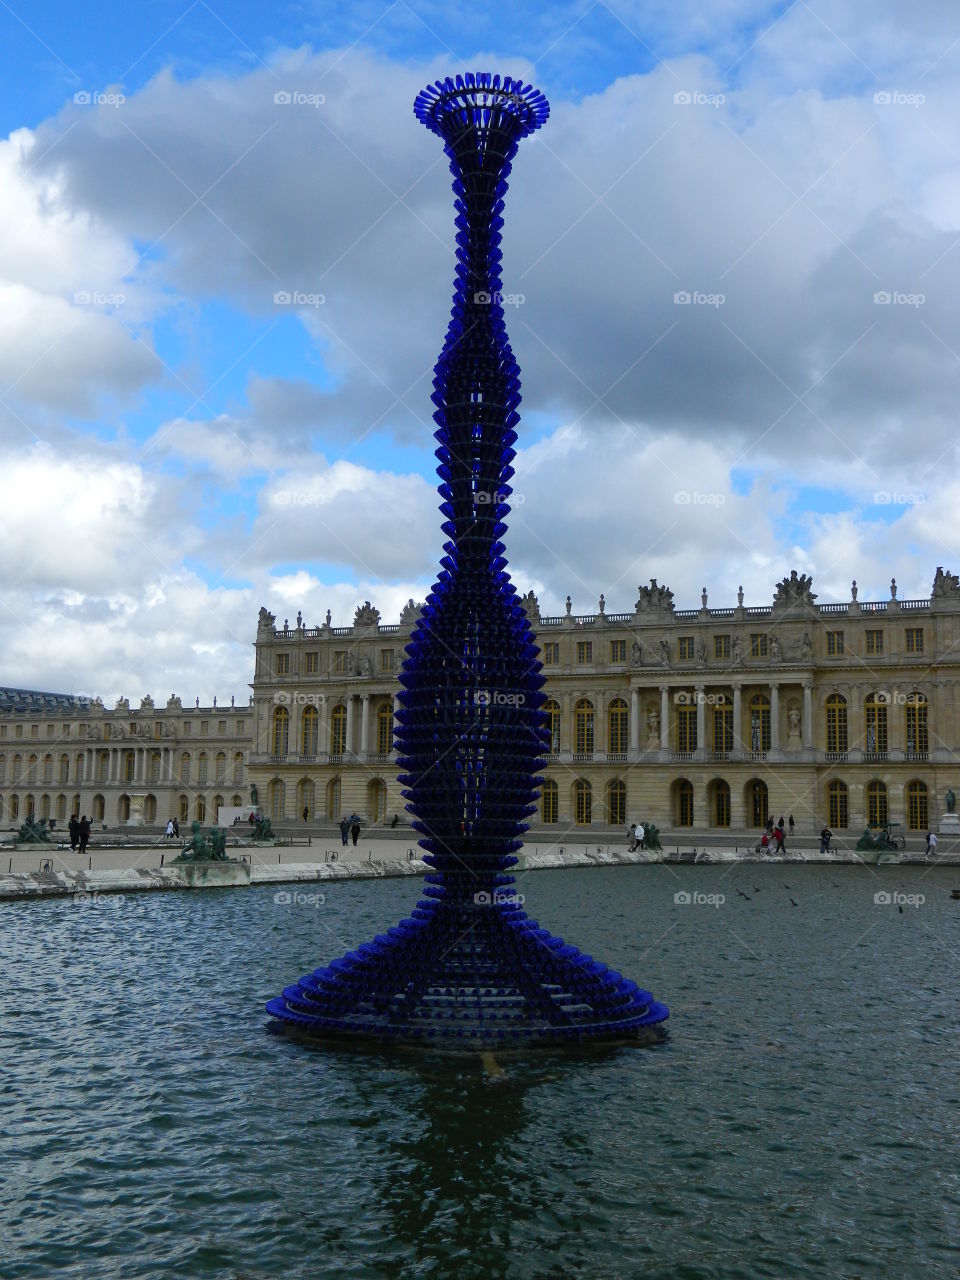 Champaign Bottle Art. This sculpture made out of Champaign bottles was on exhibit at the Palace of Versailles.